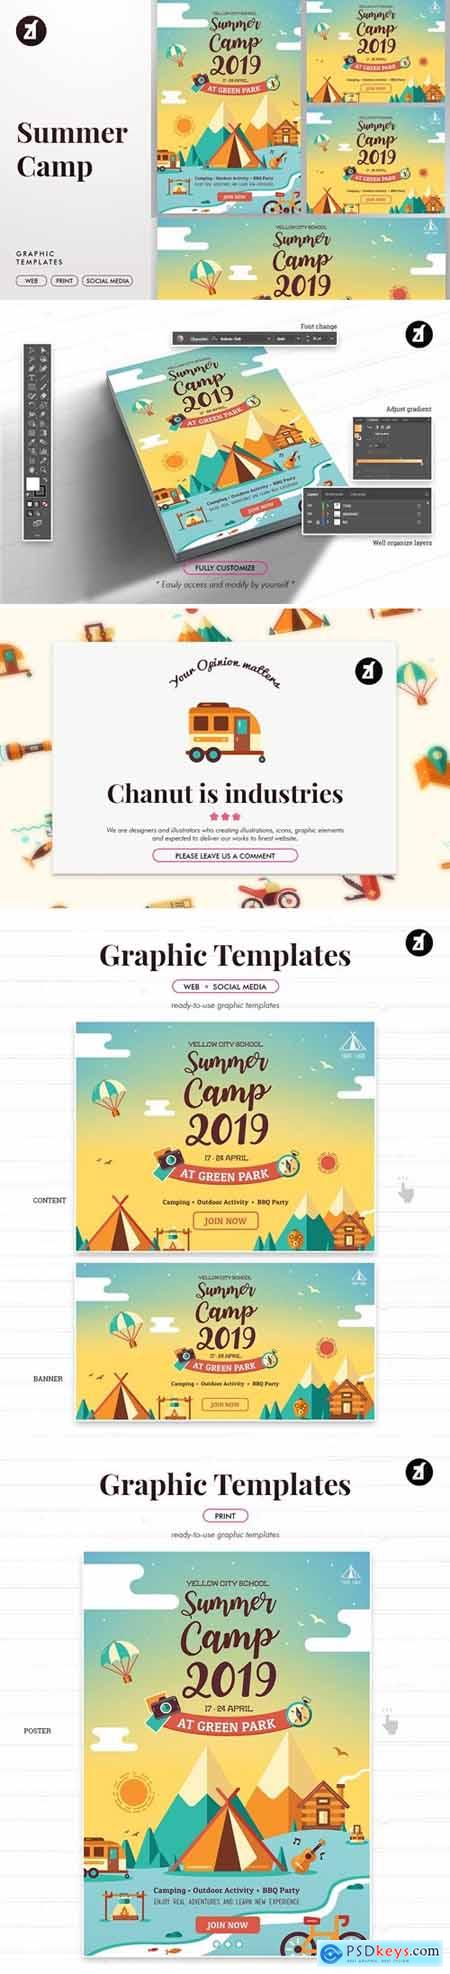 Summer camp graphic templates